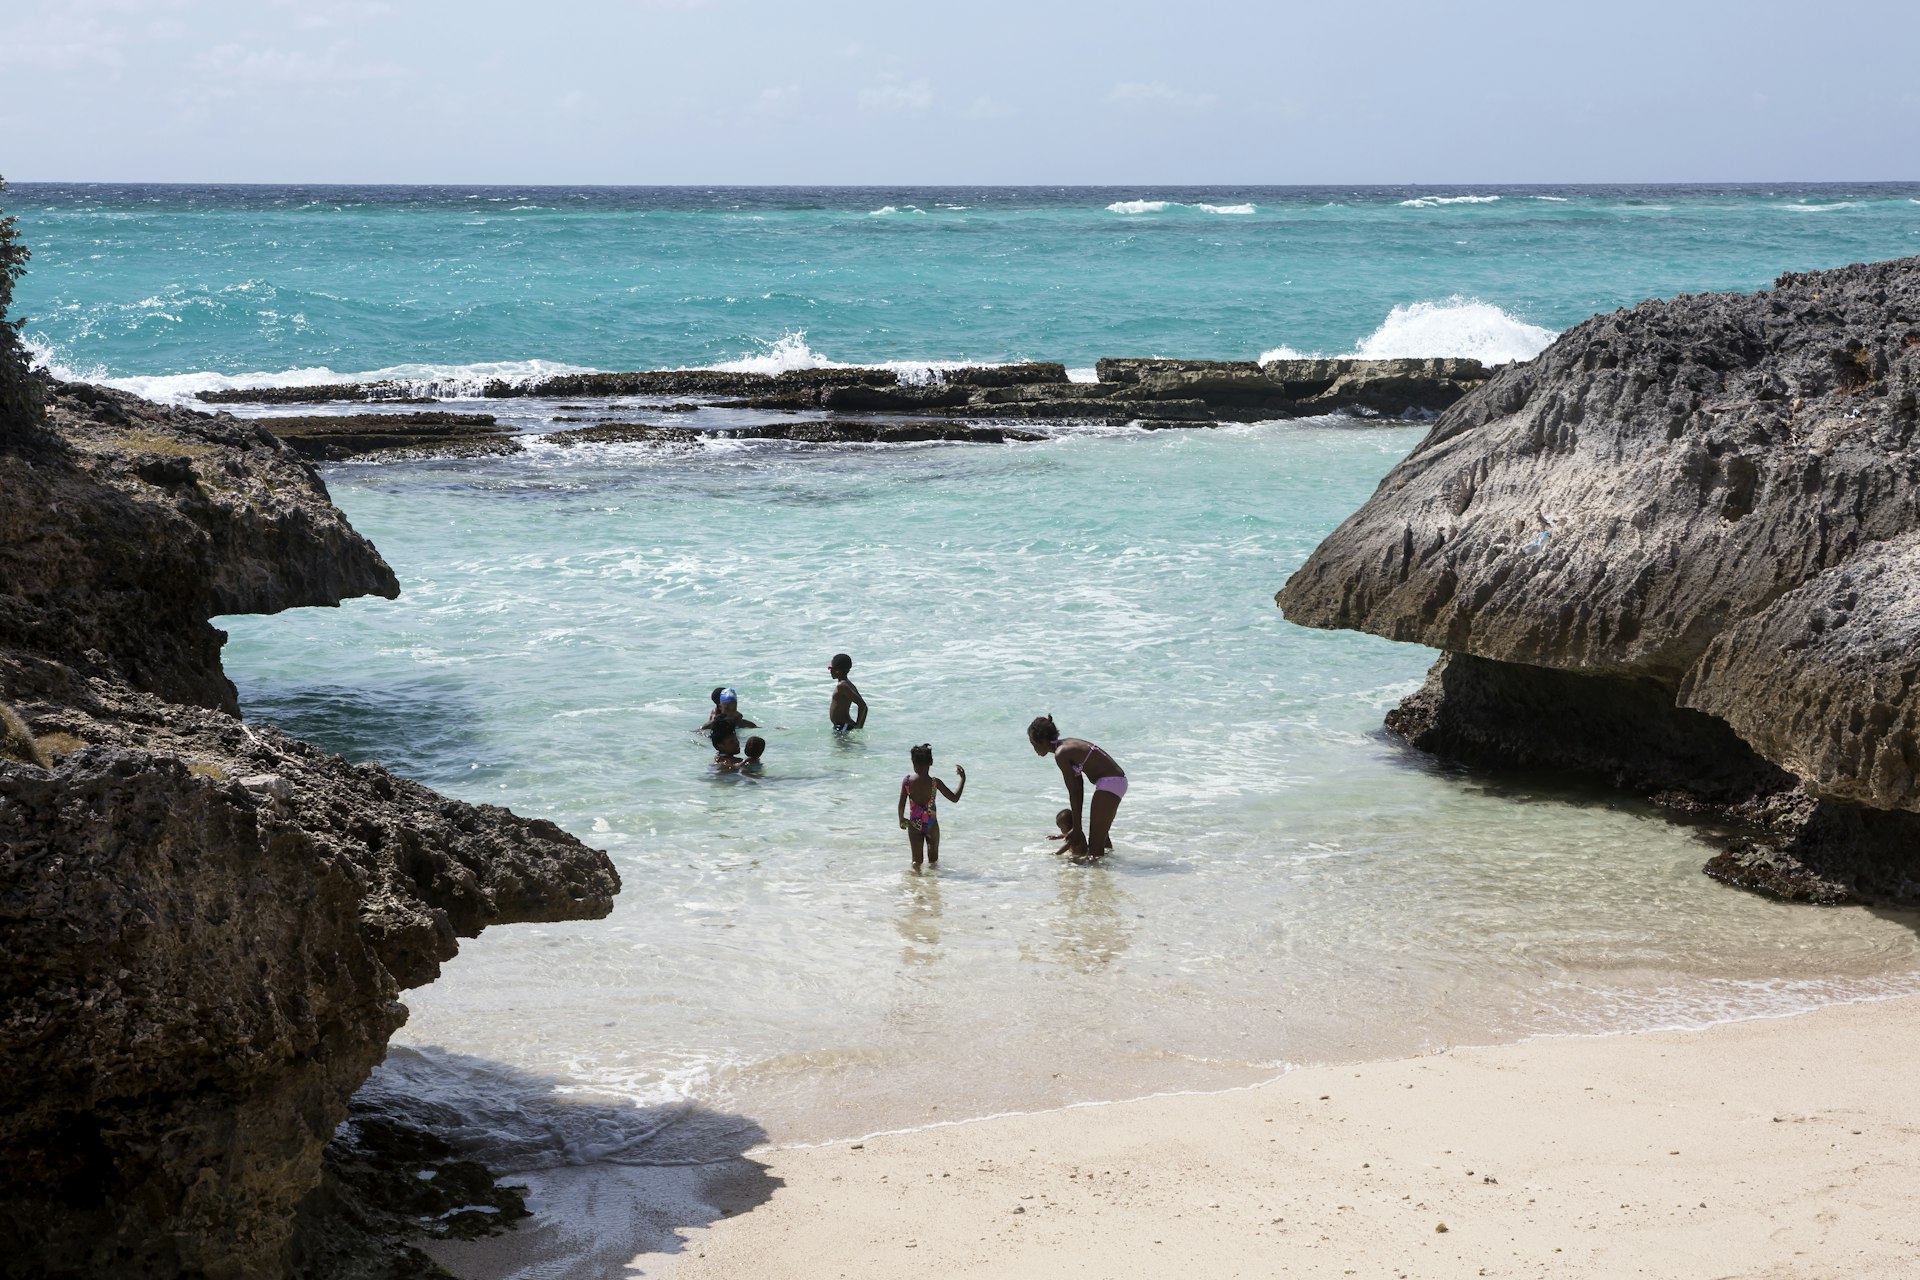 A local family enjoy some time in the sea at Shark Hole, Barbados